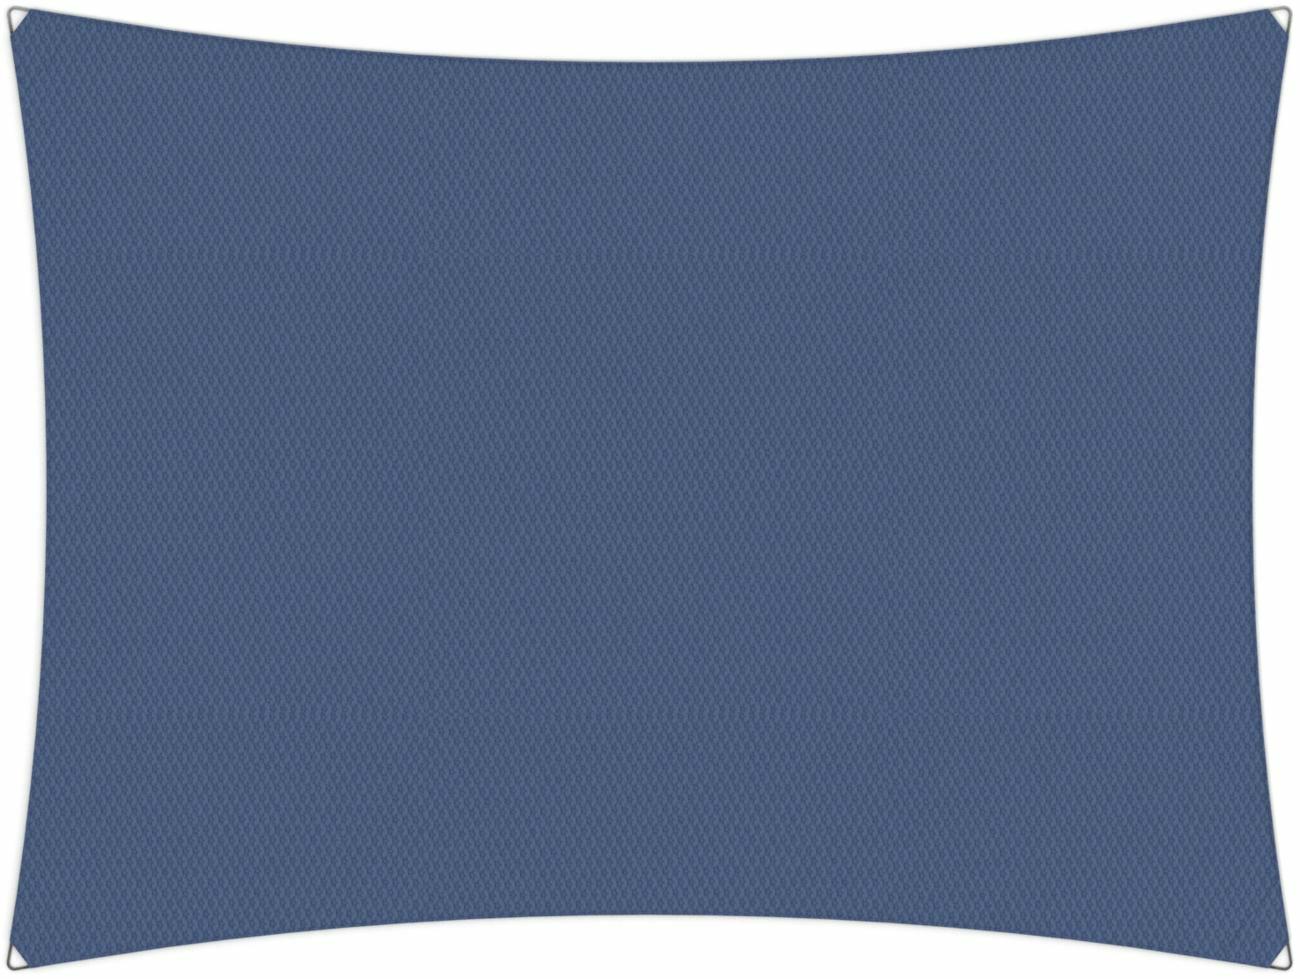 Ingenua shade sail Rectangle 4 x 3 m, for outdoor use. Colour of the fabric shade sail Blue Storm.